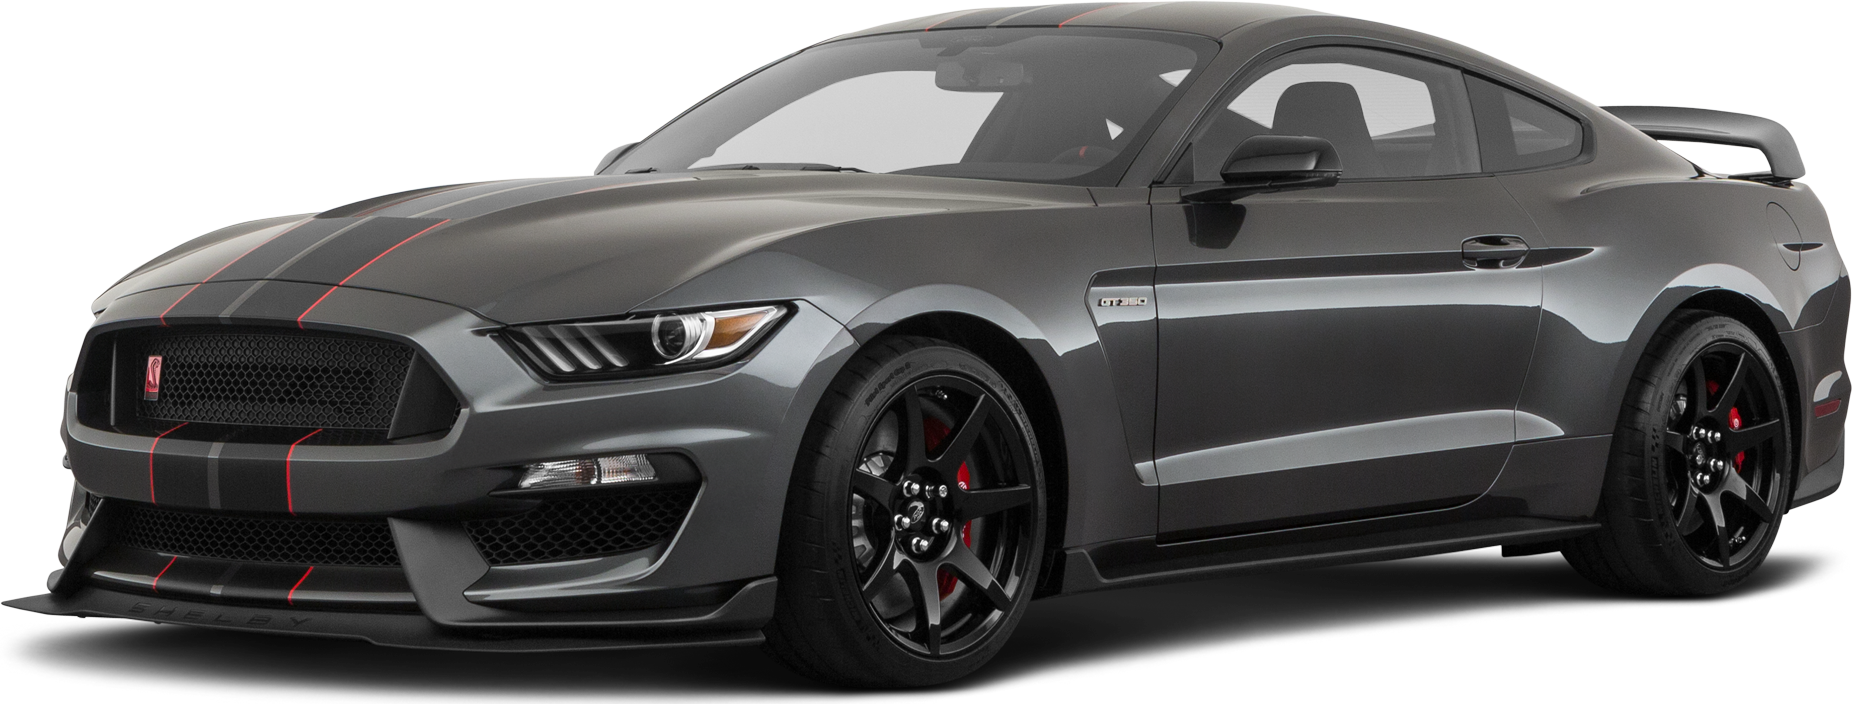 Ford Shelby GT350 Transparent File